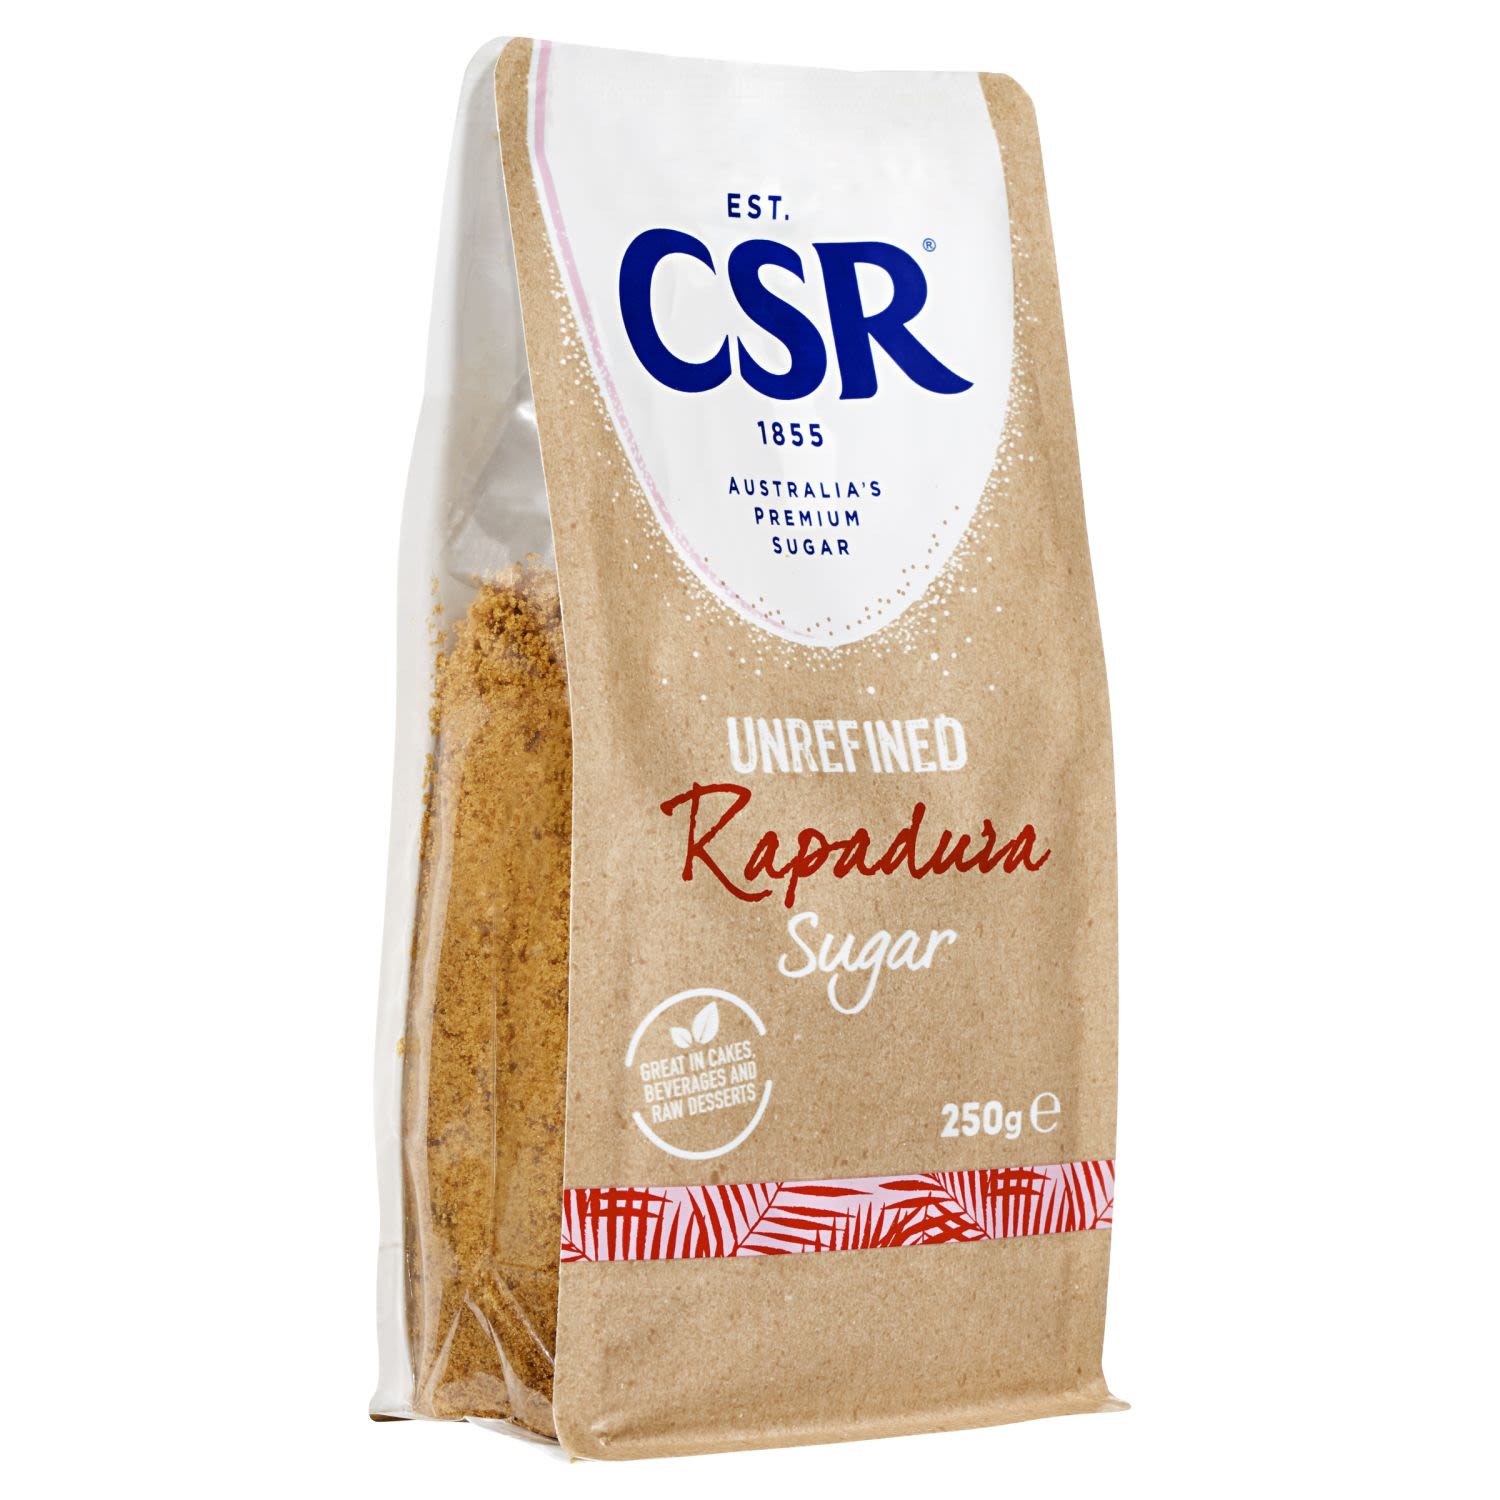 Rich in caramel flavour with a golden colour, CSR Unrefined Rapadura Sugar is perfect for baking. This sugar is made from evaporated cane juice, meaning it is truly unrefined. A must-have in the kitchen, use it to flavour pastries, ganaches and syrups. It also works well in your favourite beverages like coffee and hot chocolate.<br /> <br /> <br /><br />Country of Origin: Product of Sri Lanka, Packed in Australia.